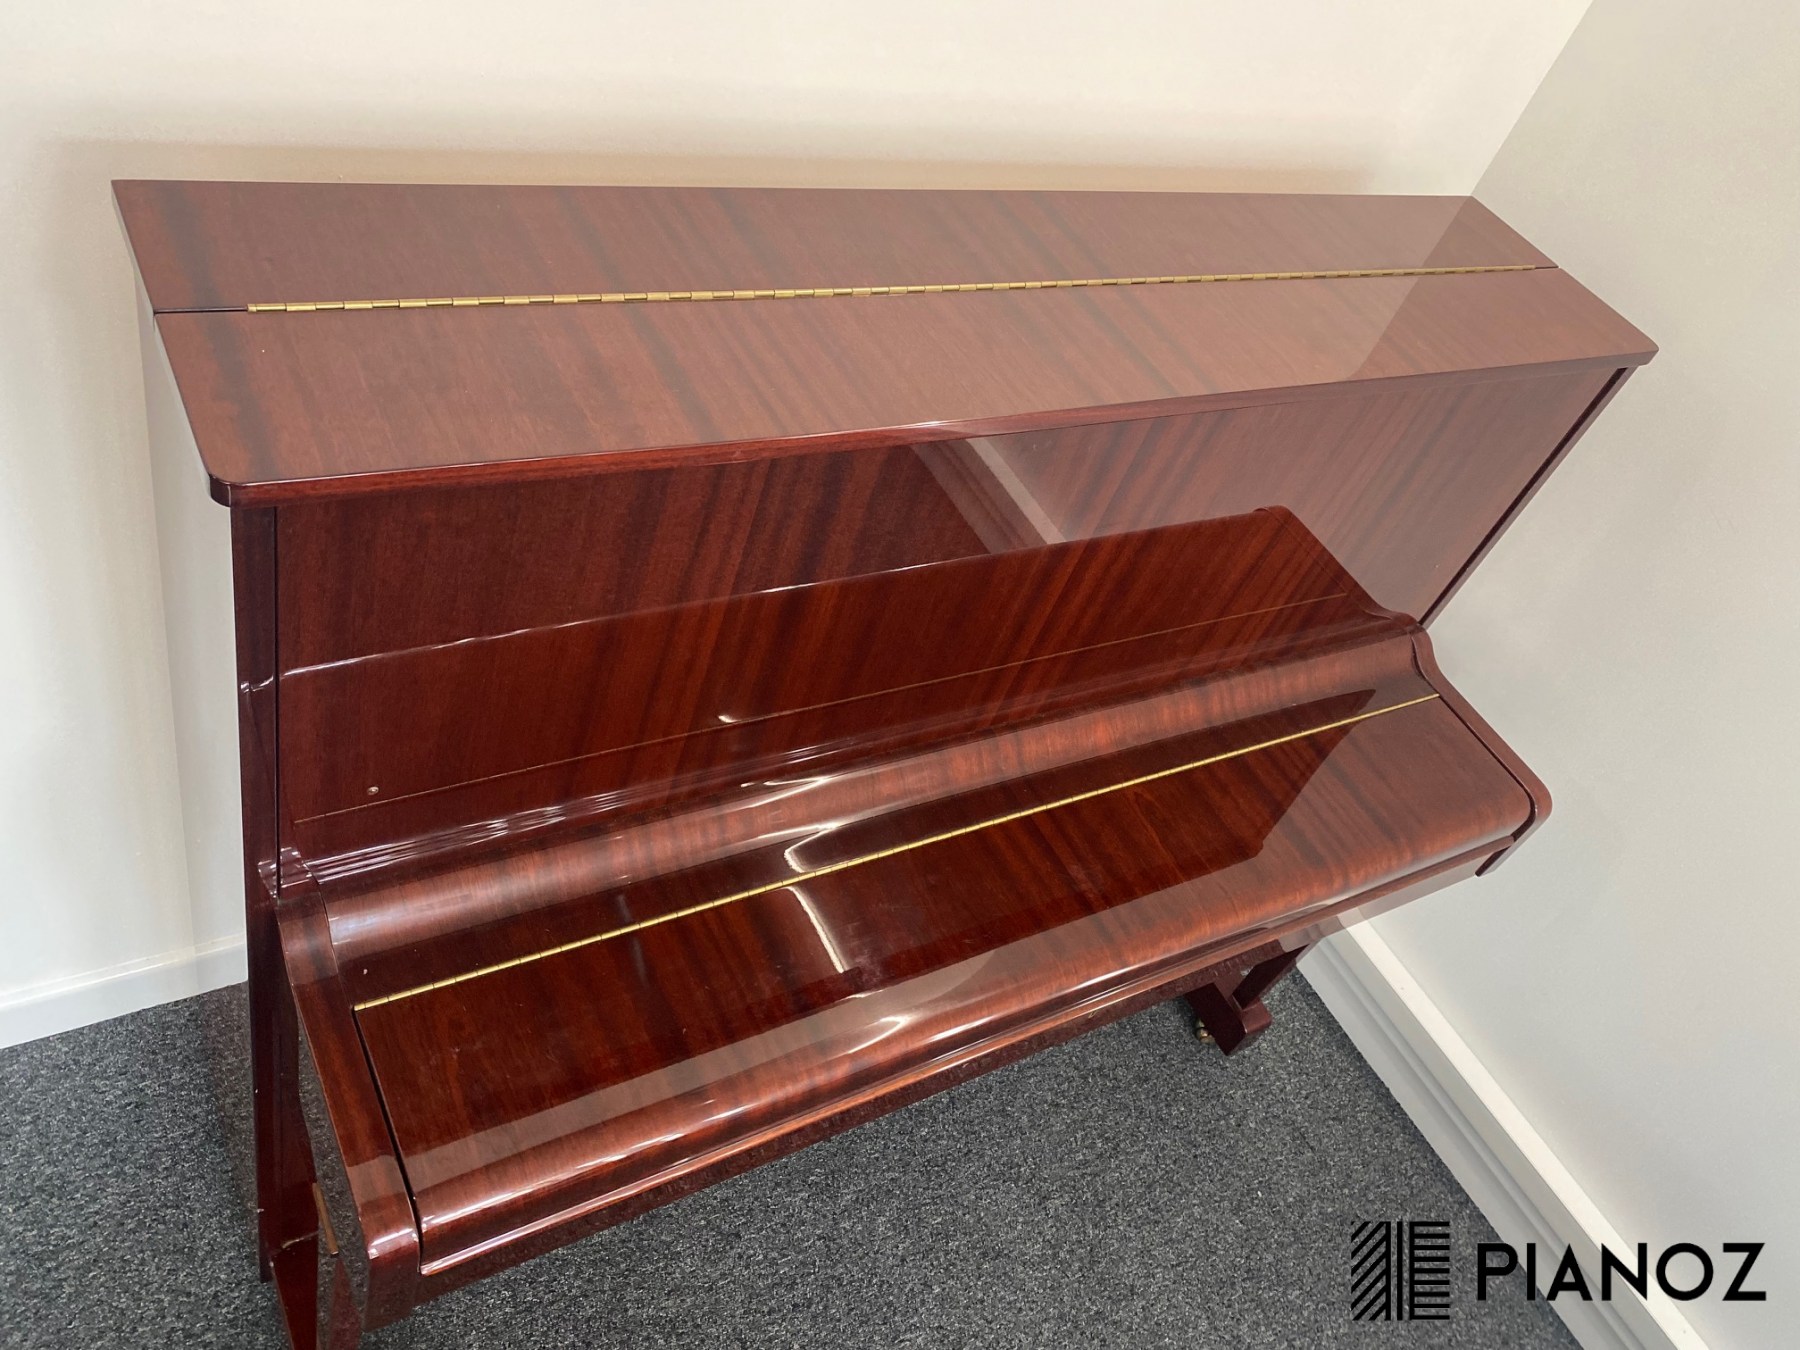 Petrof  125 Upright Piano piano for sale in UK